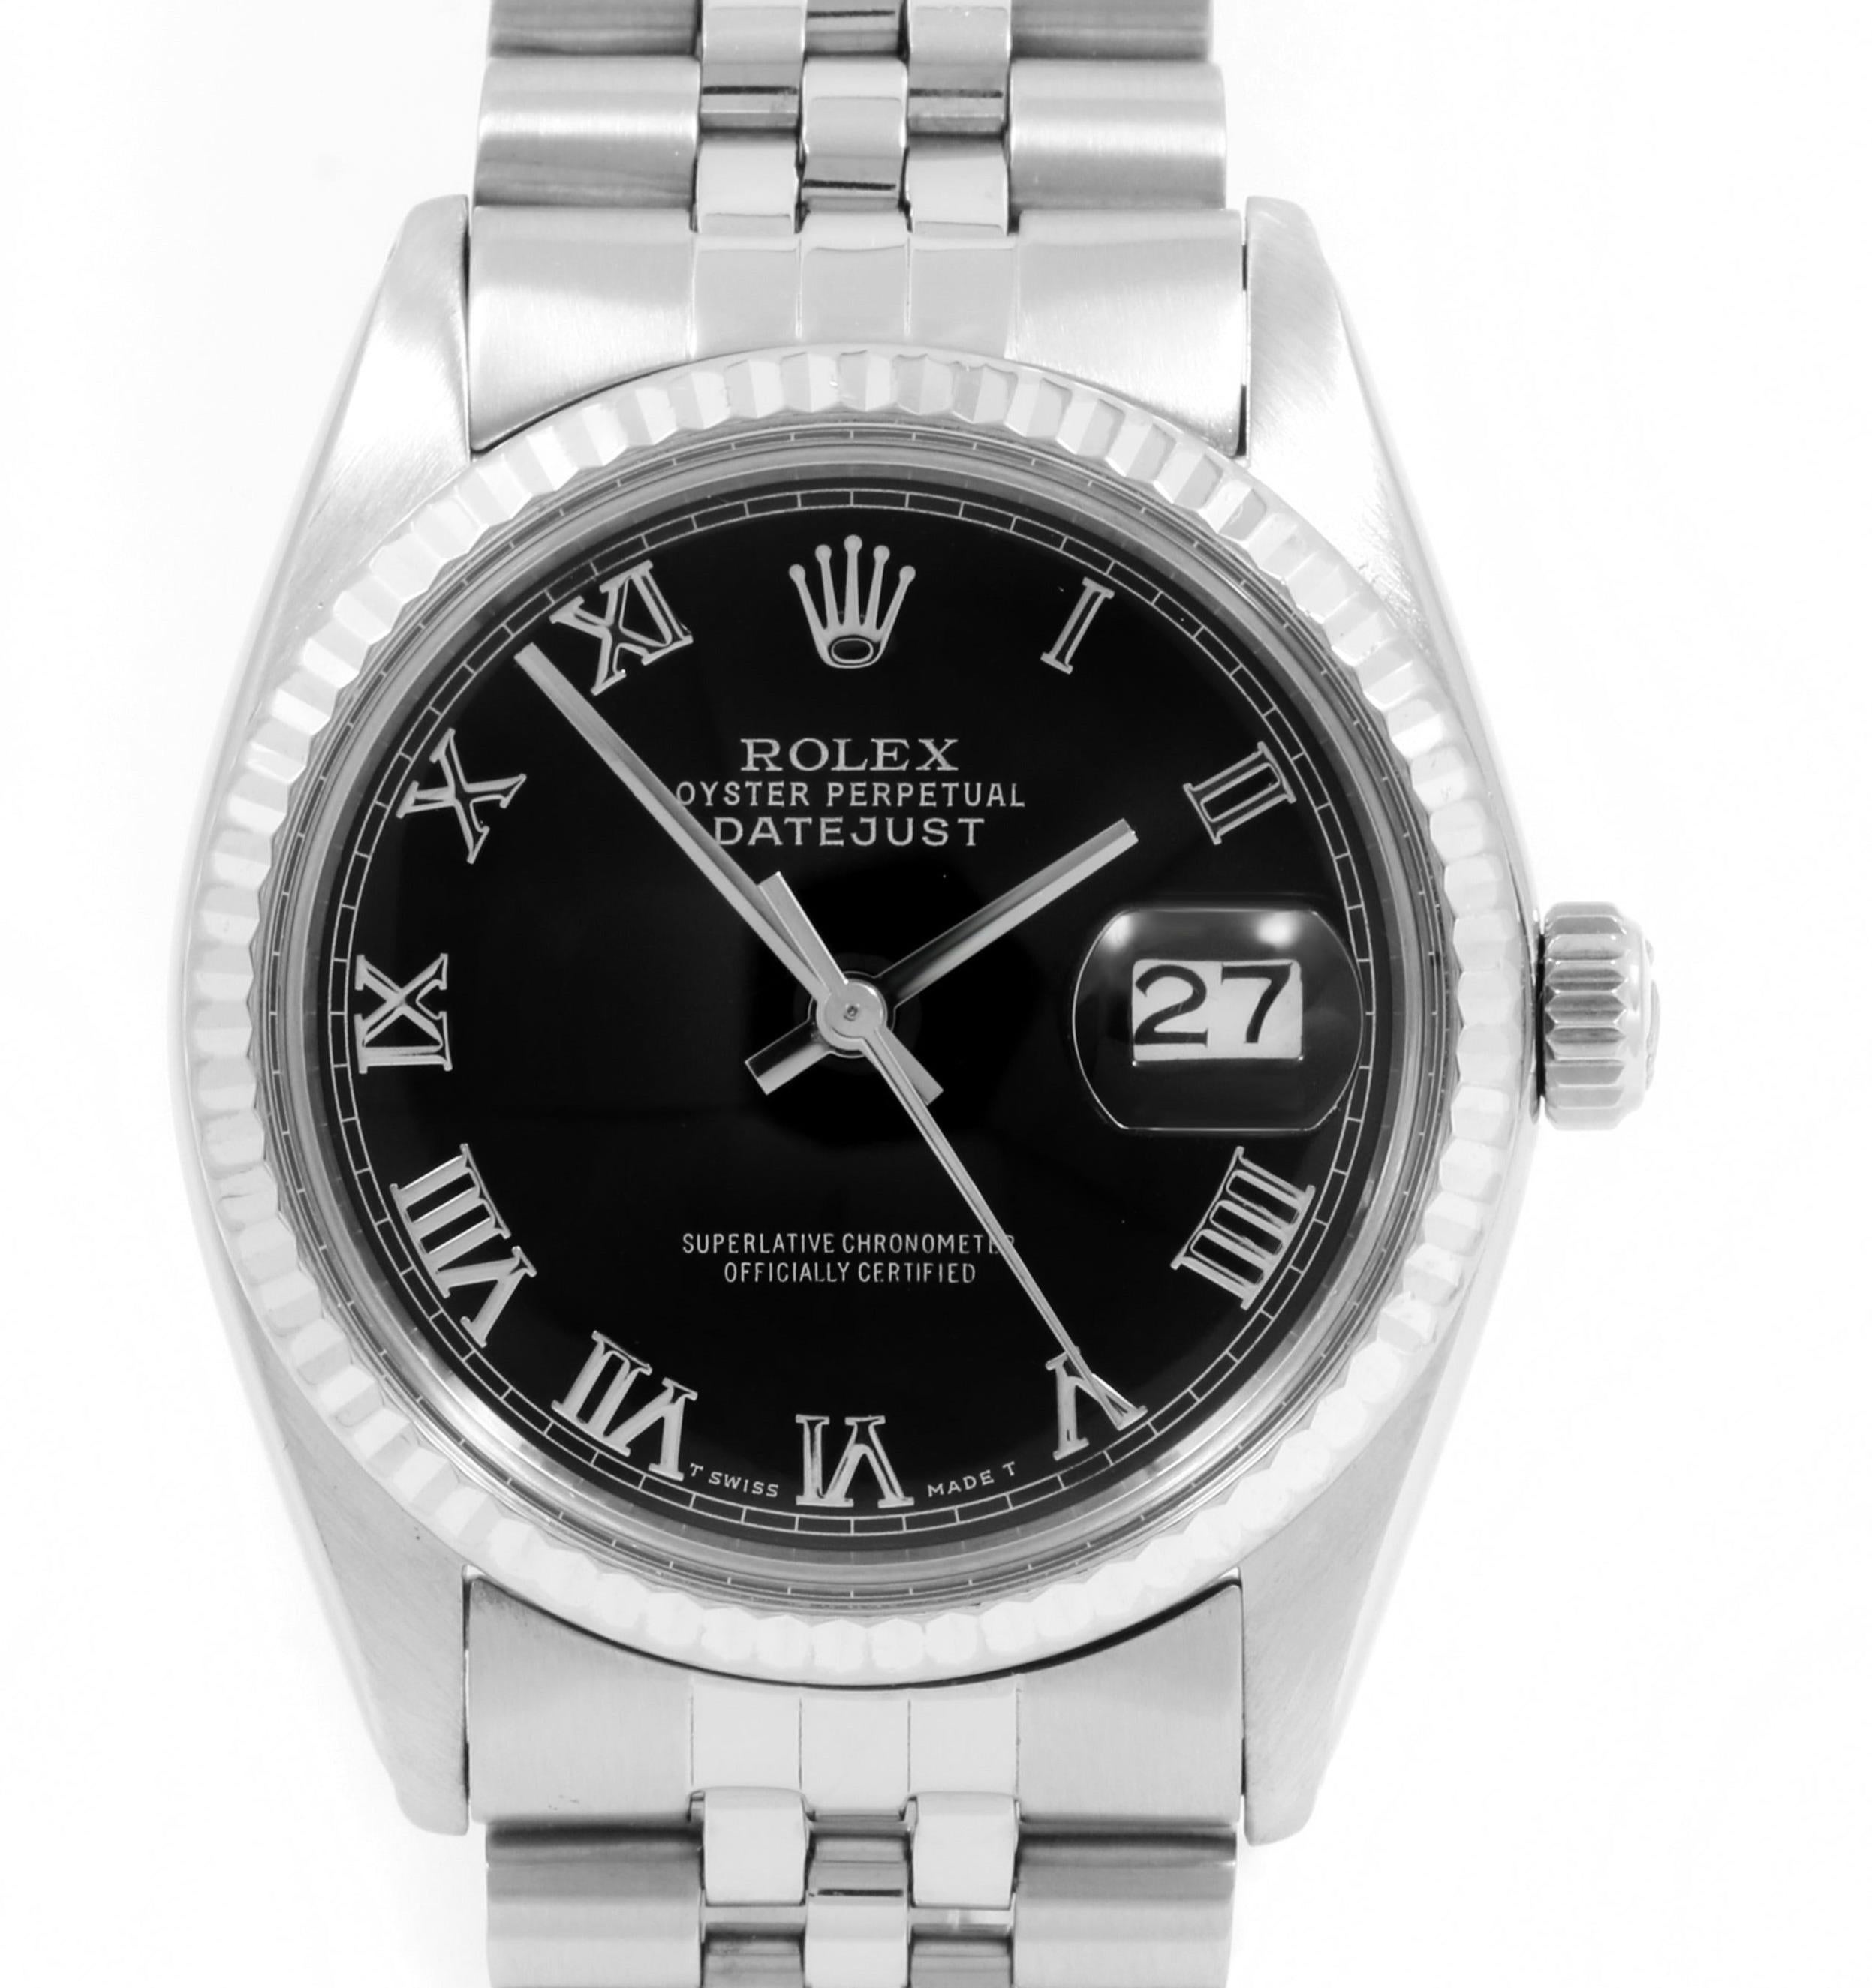 (Watch Description) 
Brand - Rolex
Gender - Mens
Model - 16014 Datejust
Metals - Steel / Yellow Gold
Case size - 36mm
Bezel - White gold Fluted.
Crystal - Acrylic
Movement - Automatic Cal.3035
Dial - Refinished Black Roman
Wrist band - Steel